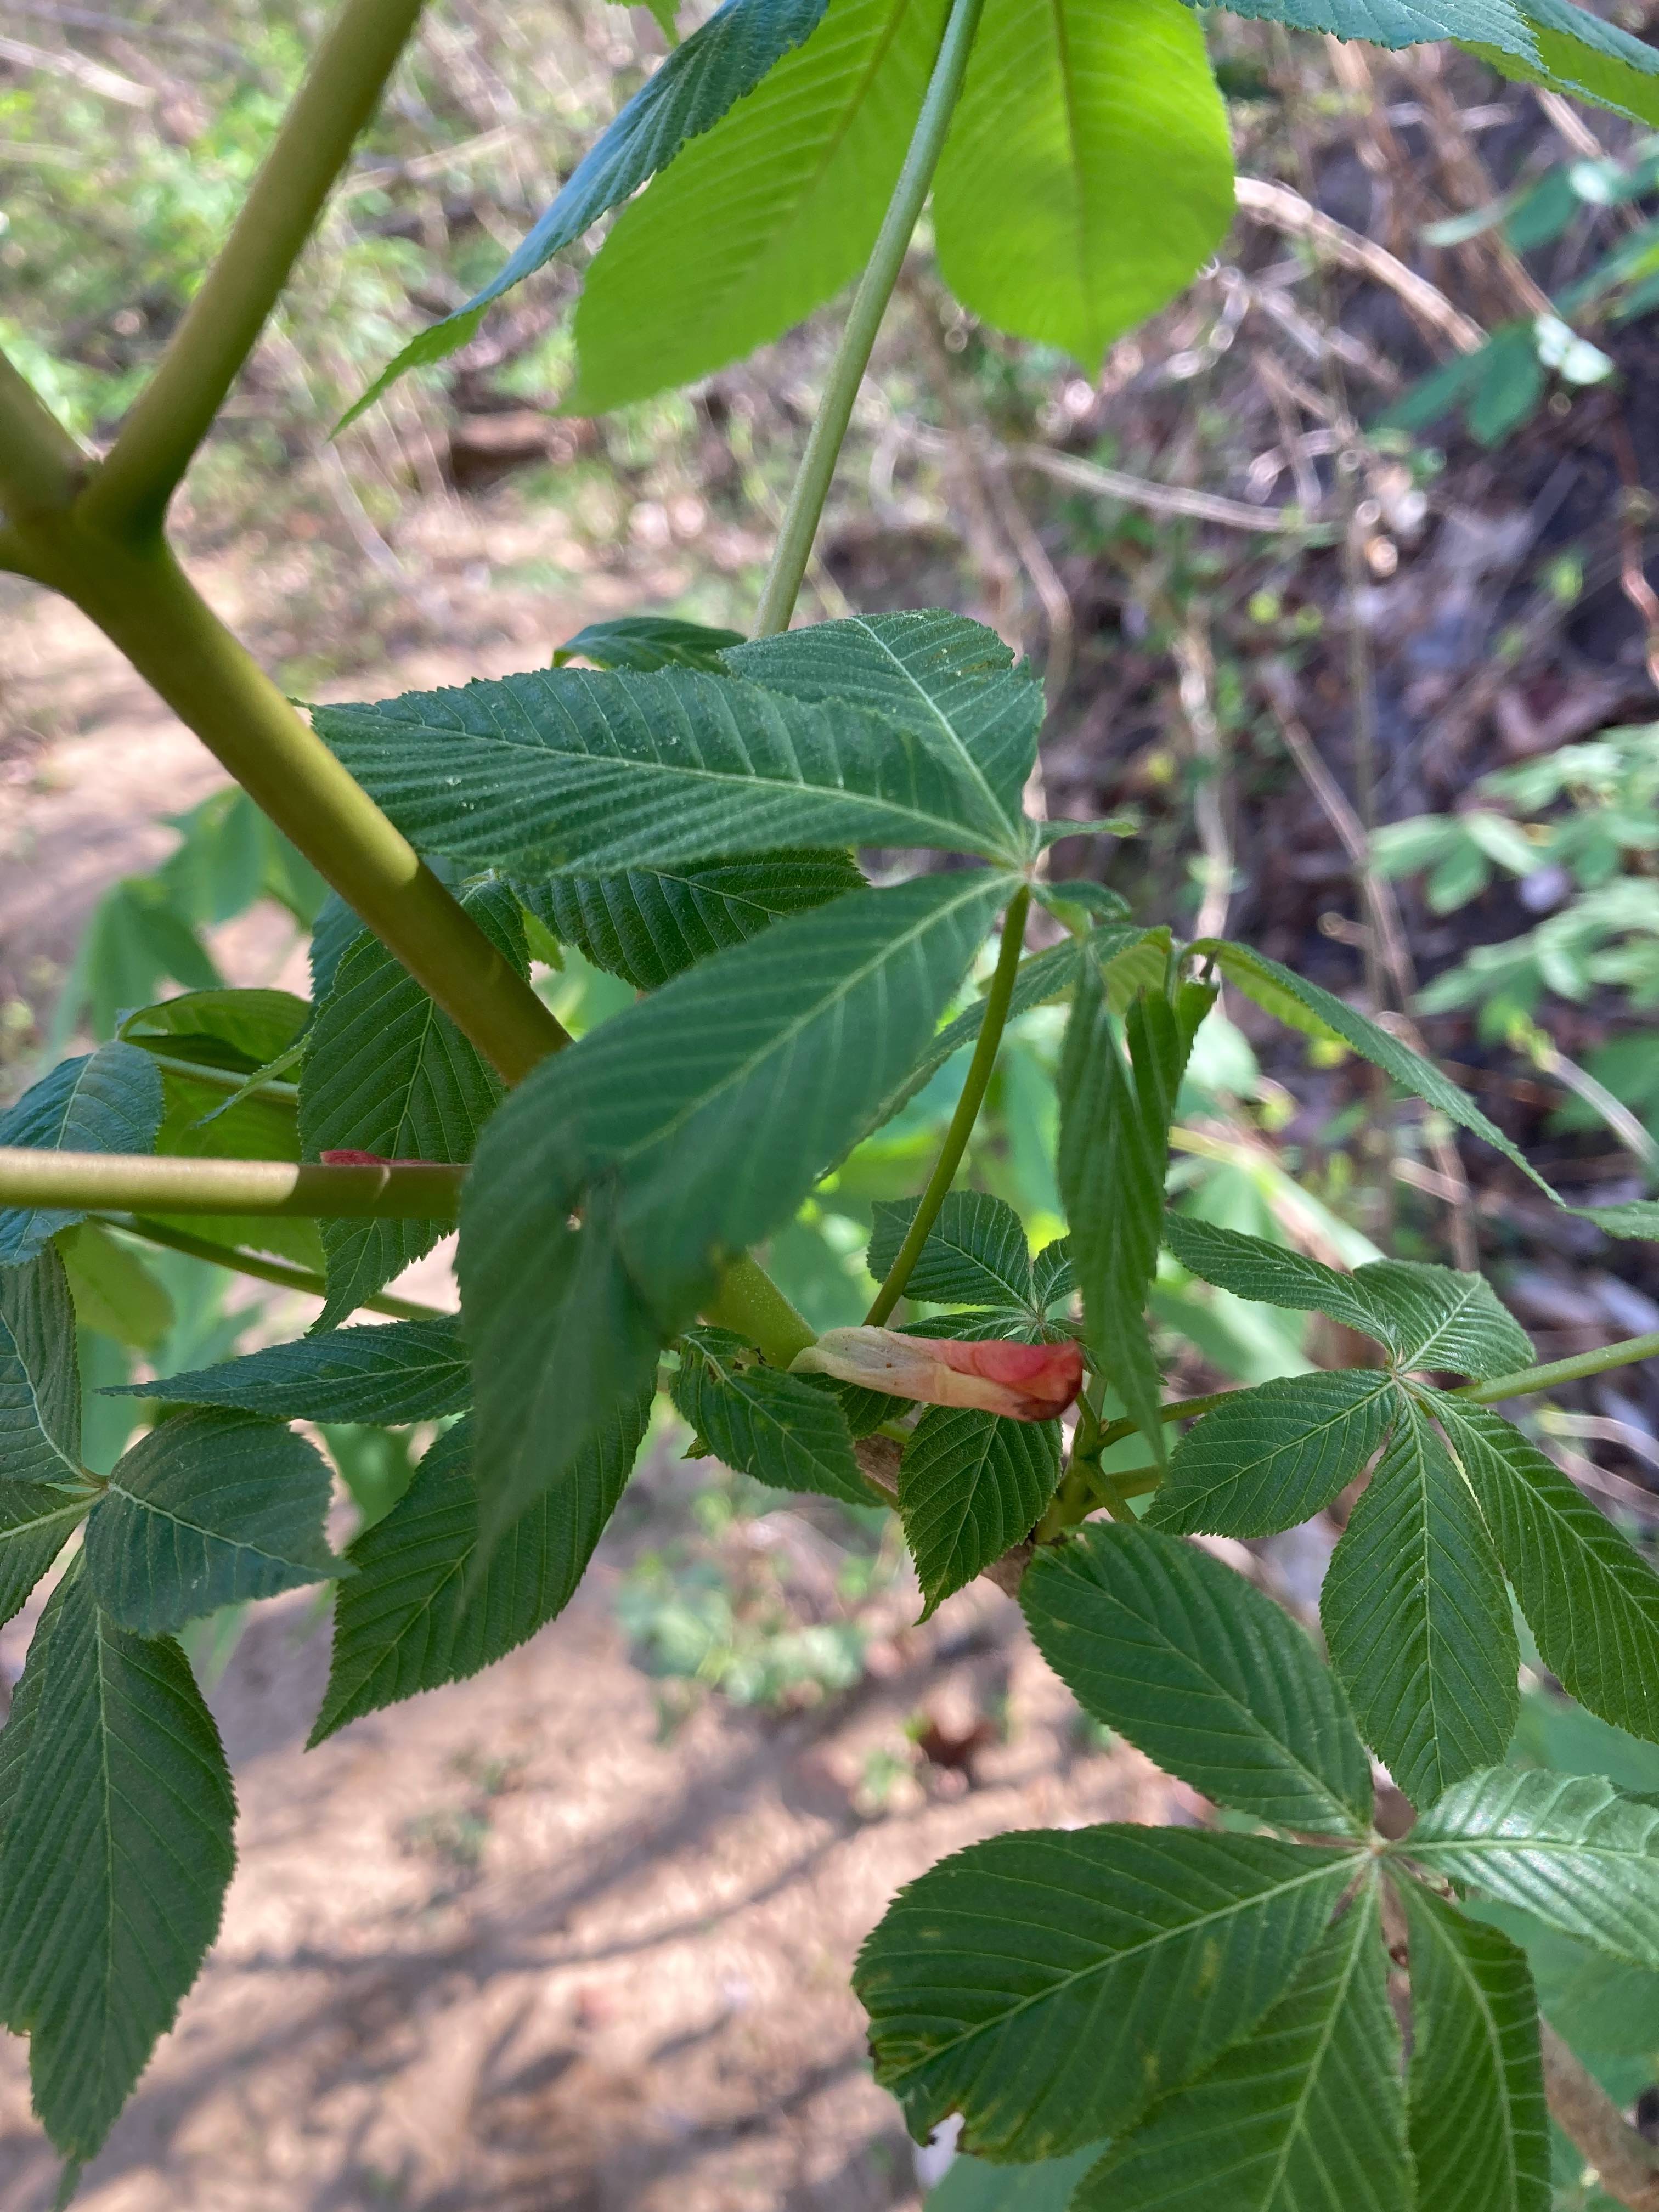 The Scientific Name is Aesculus sylvatica. You will likely hear them called Painted Buckeye. This picture shows the A remnant red terminal bud scale still present amidst the fresh green new vegetation. of Aesculus sylvatica